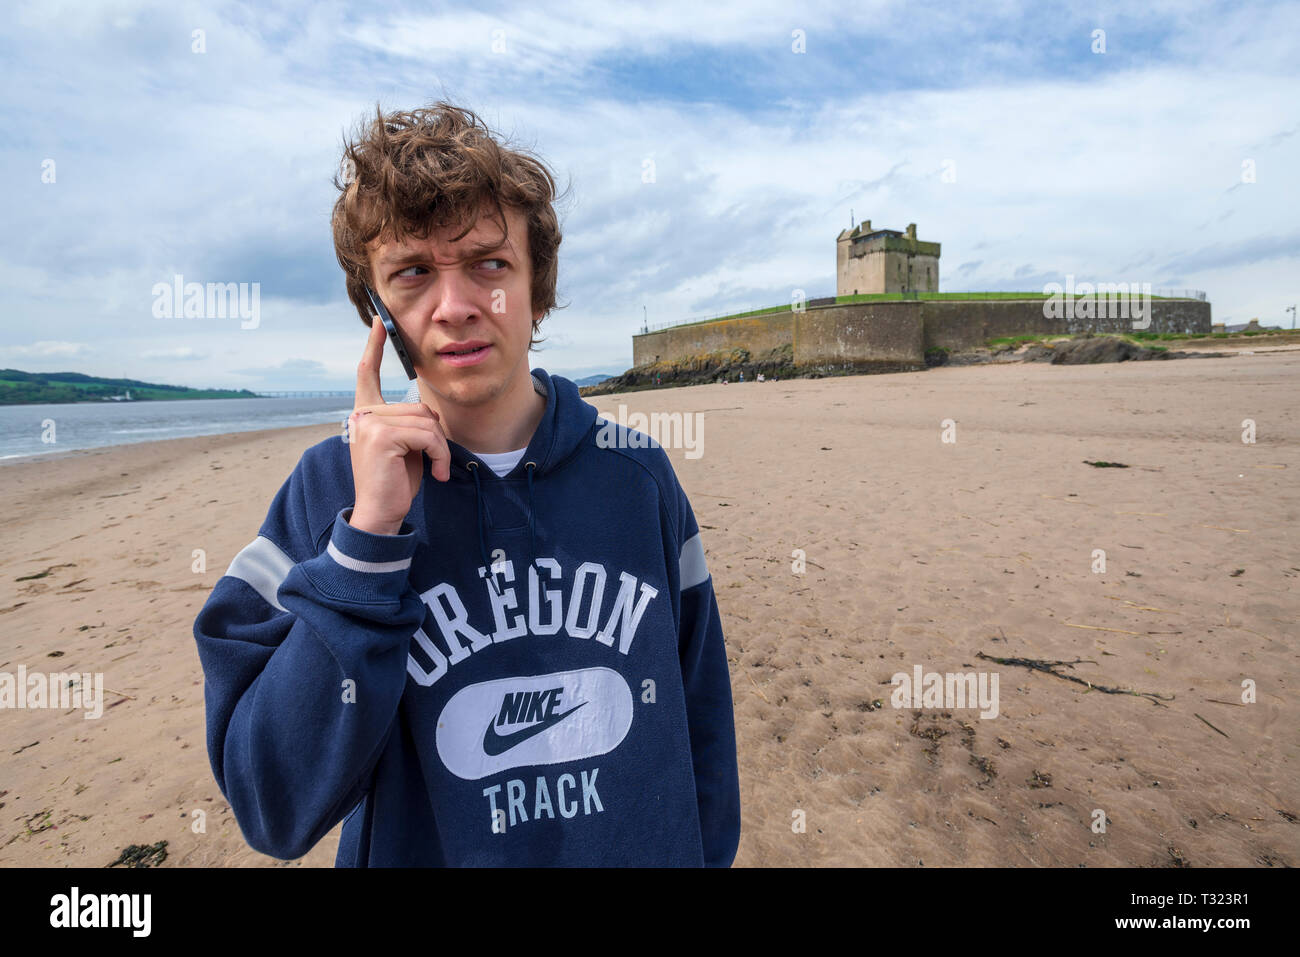 Youth talking on mobile phone. Stock Photo